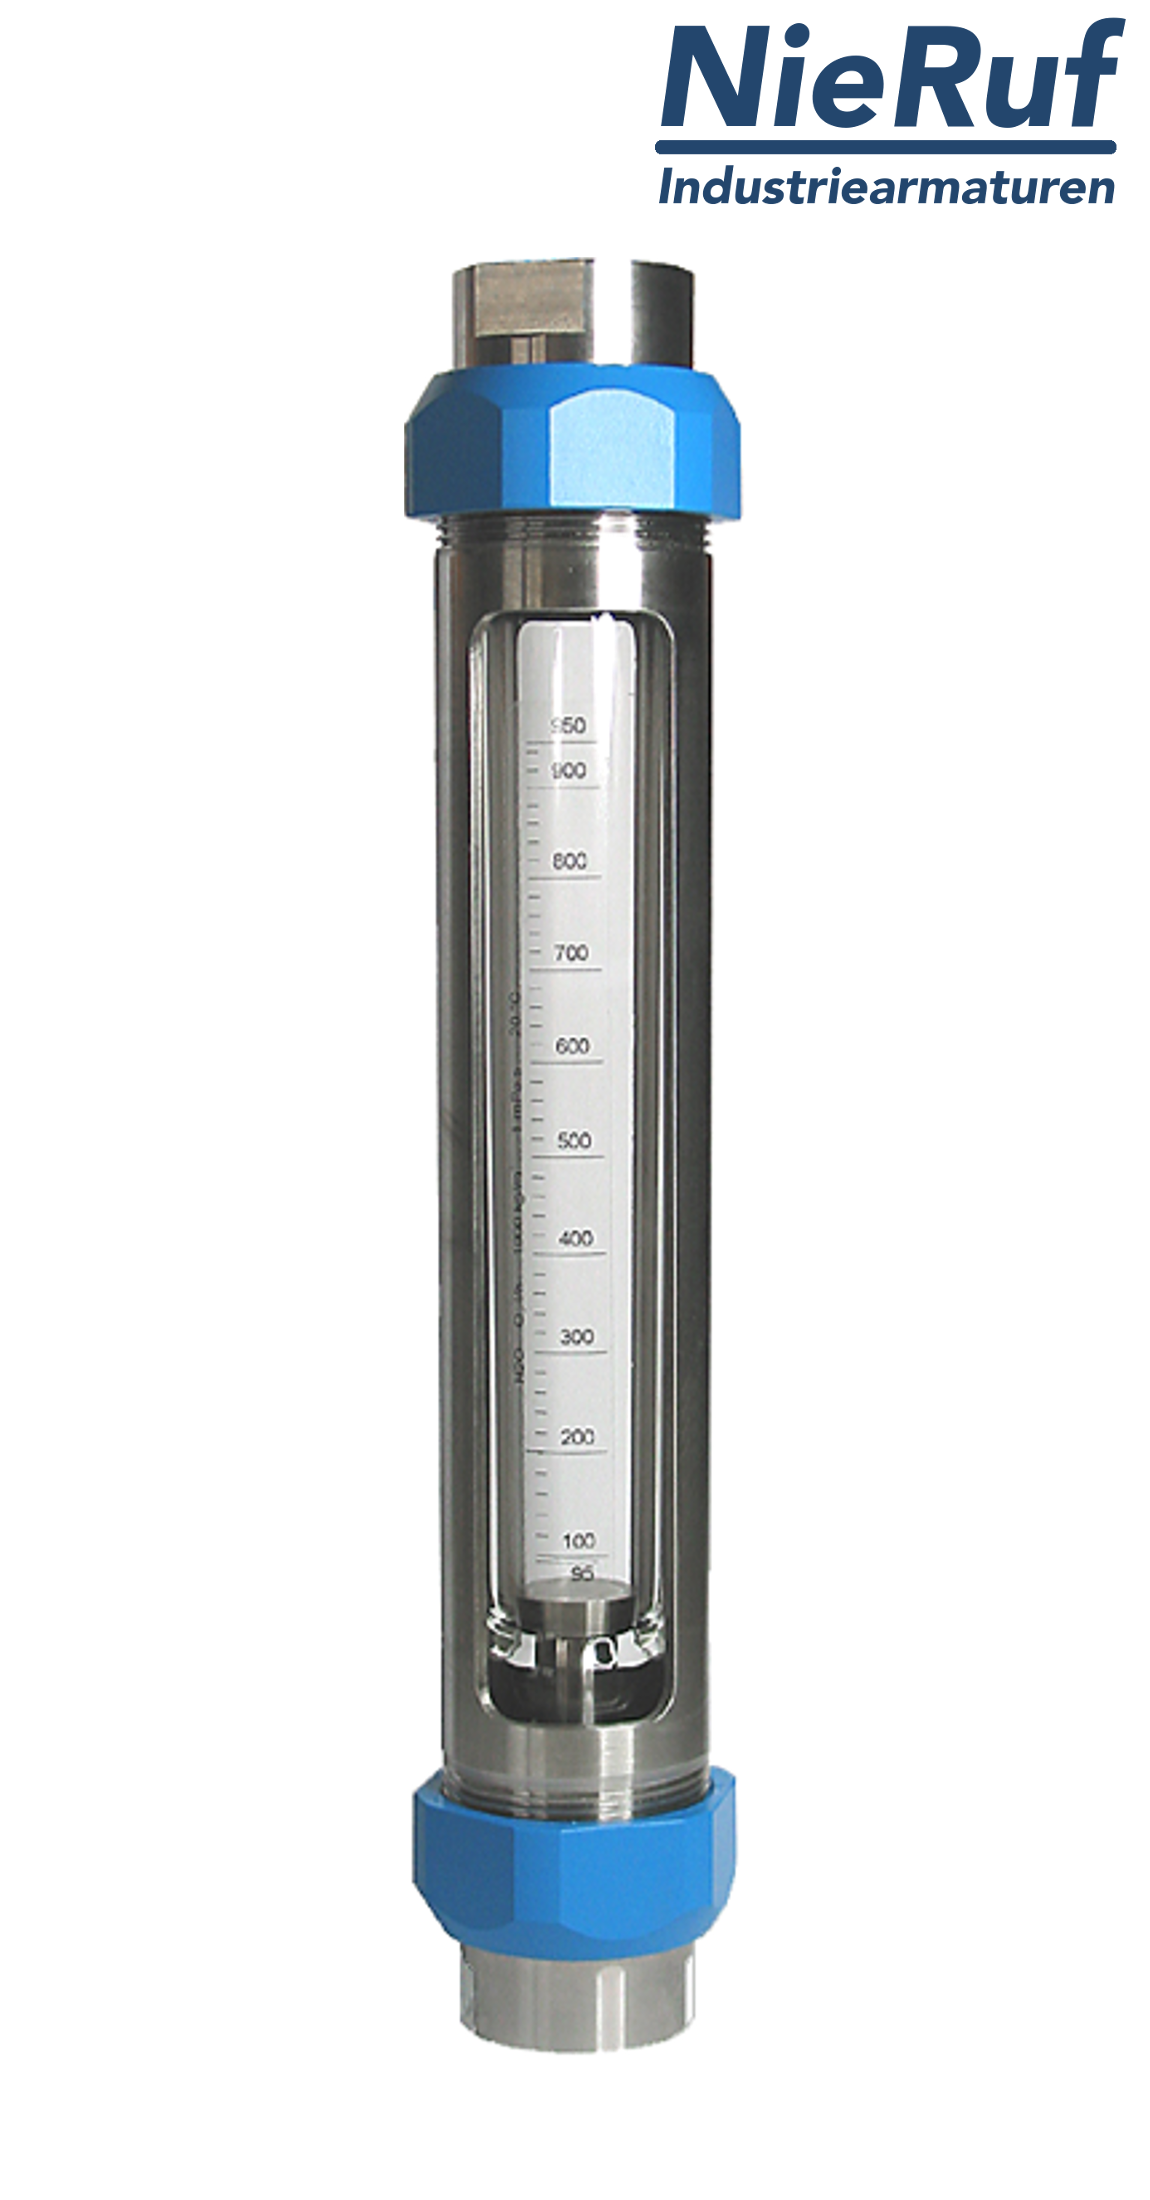 Variable area flowmeter stainless steel + borosilicate 1/2" inch 125.0 - 1250 l/h water FKM